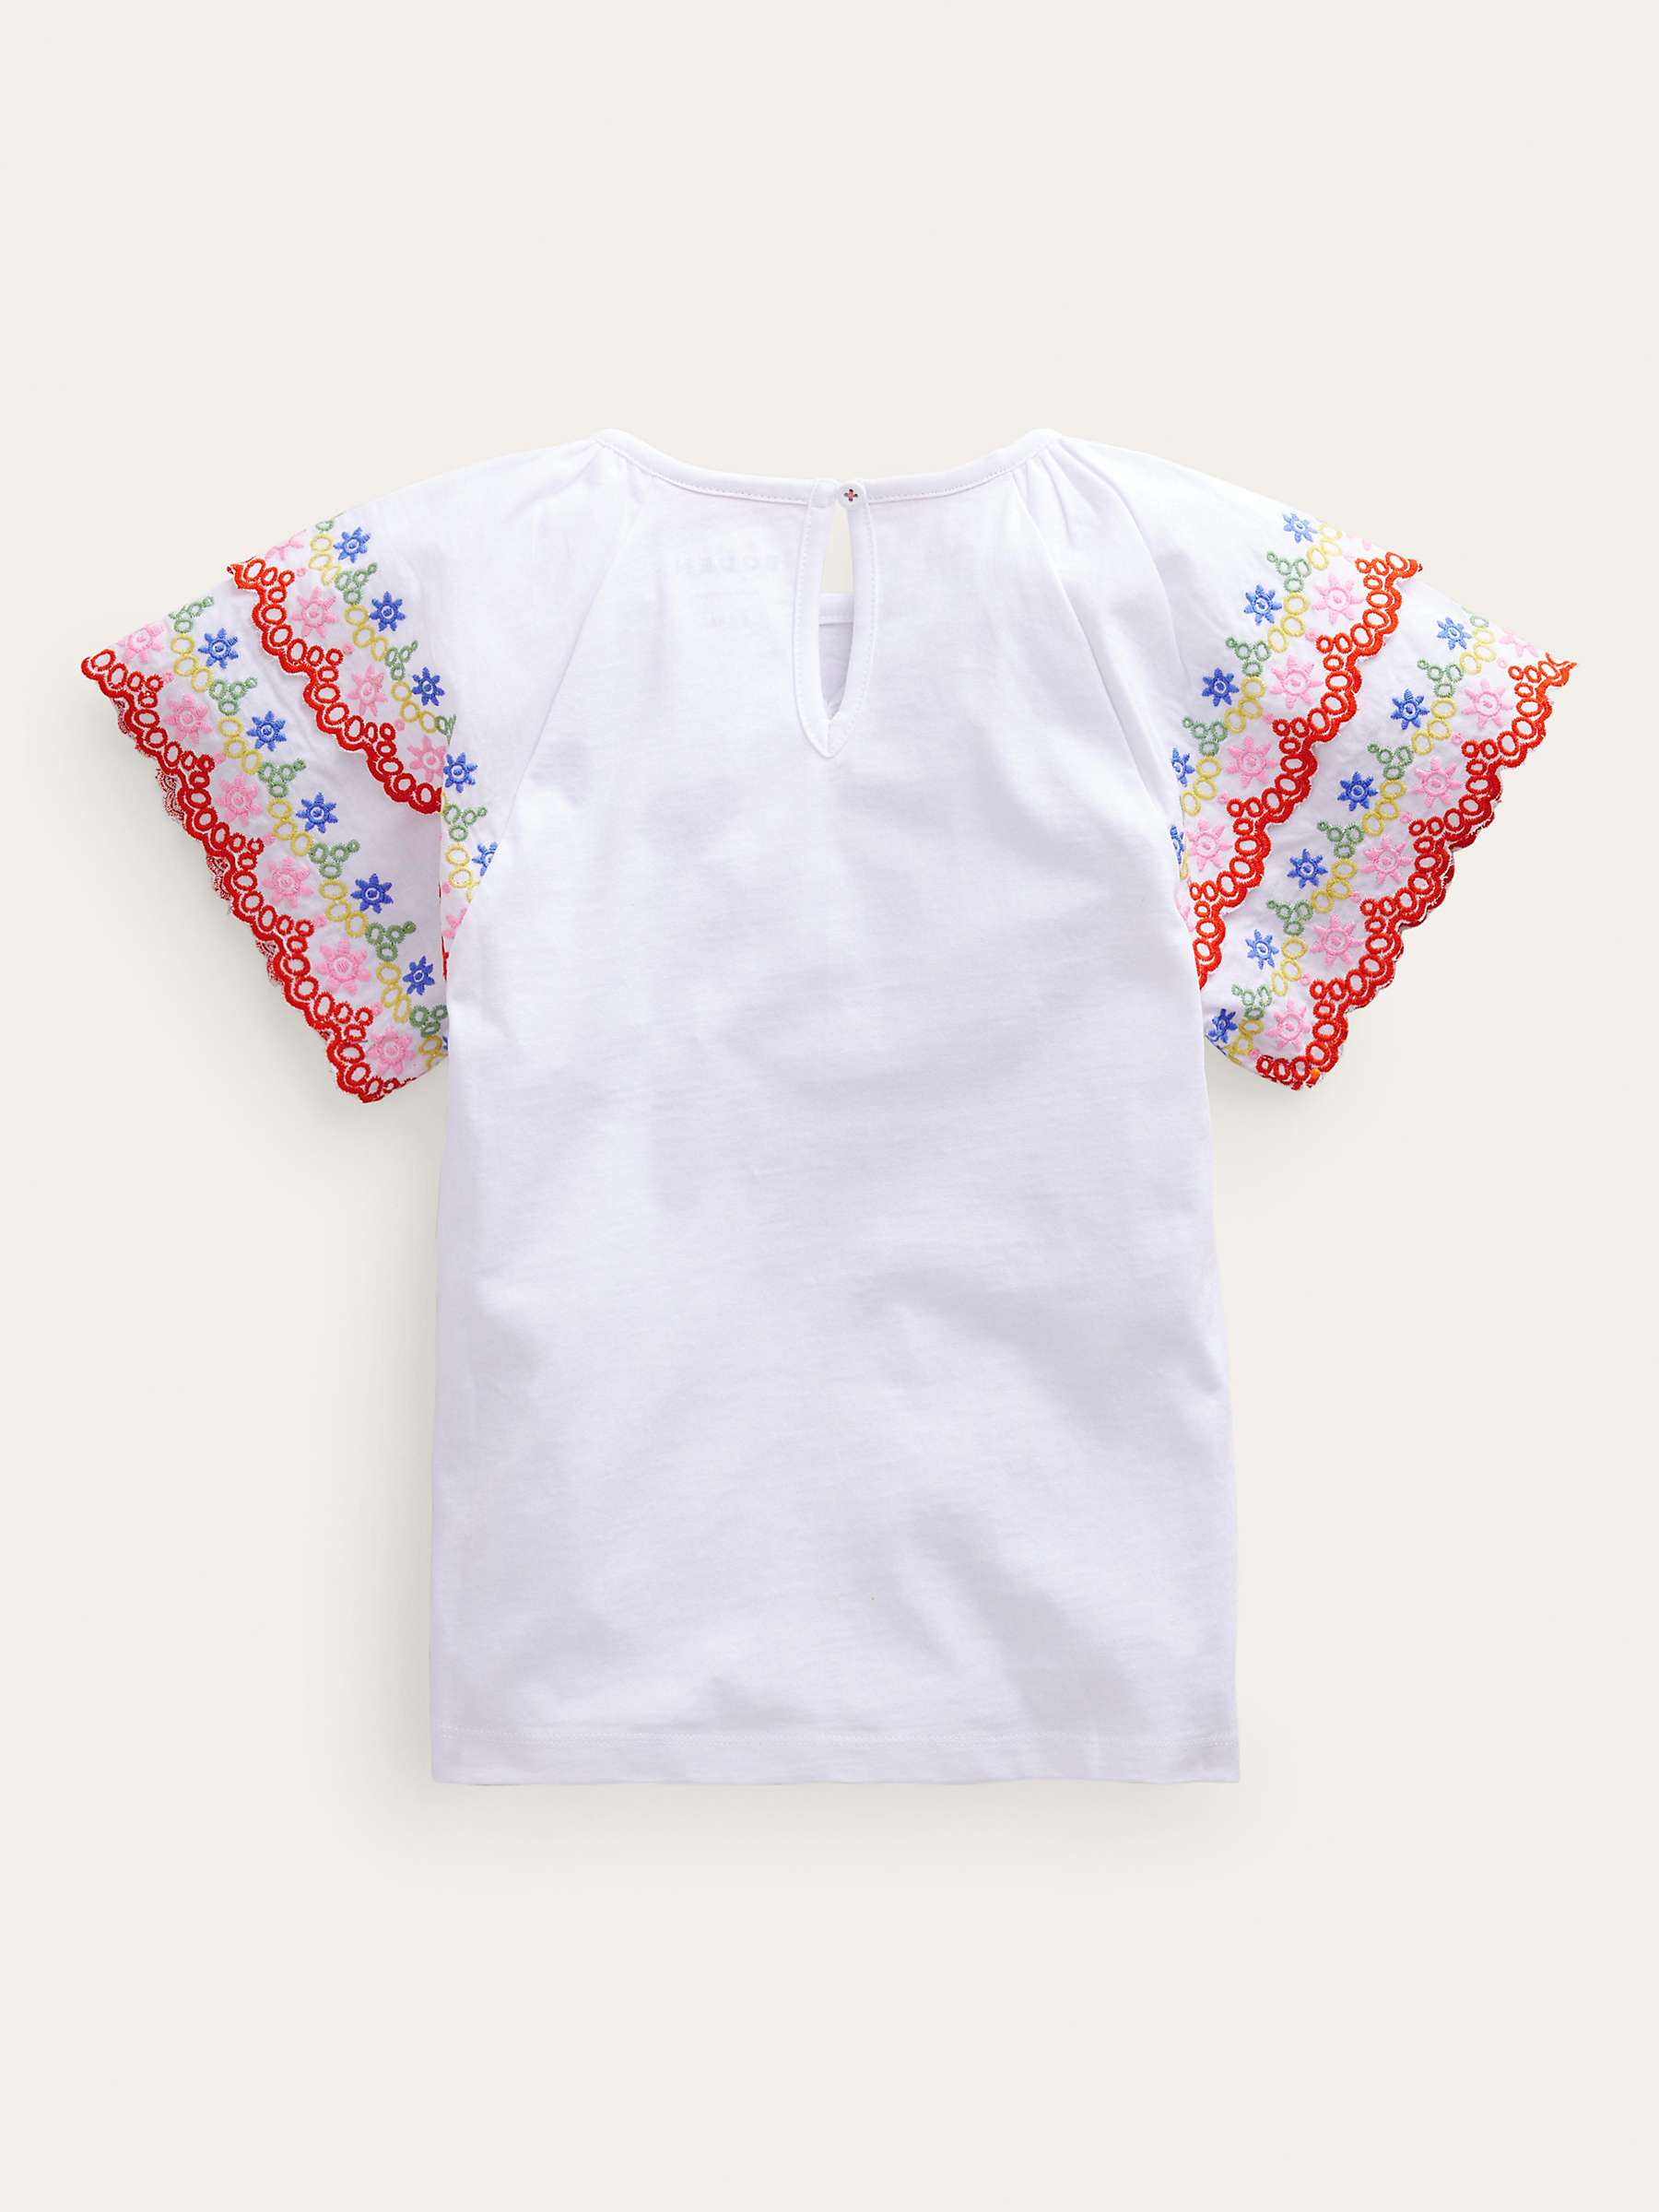 Buy Mini Boden Kids' Broderie Sleeve Mix T-Shirt, Ivory/Multi Online at johnlewis.com